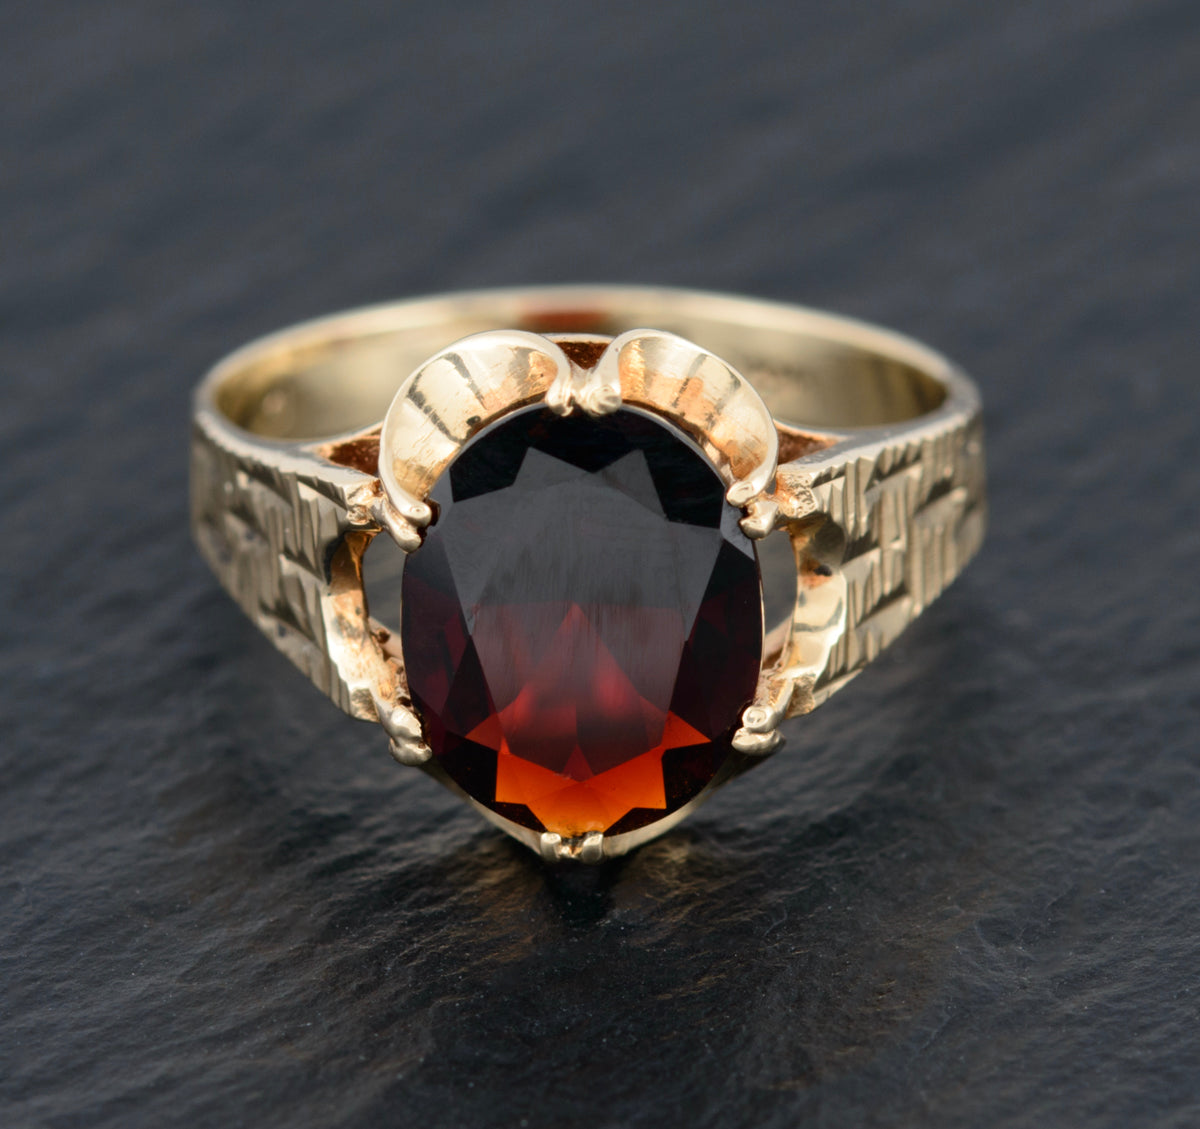 Vintage 9ct Gold Ring With Garnet Natural Gemstone 1970's Retro (A1503)